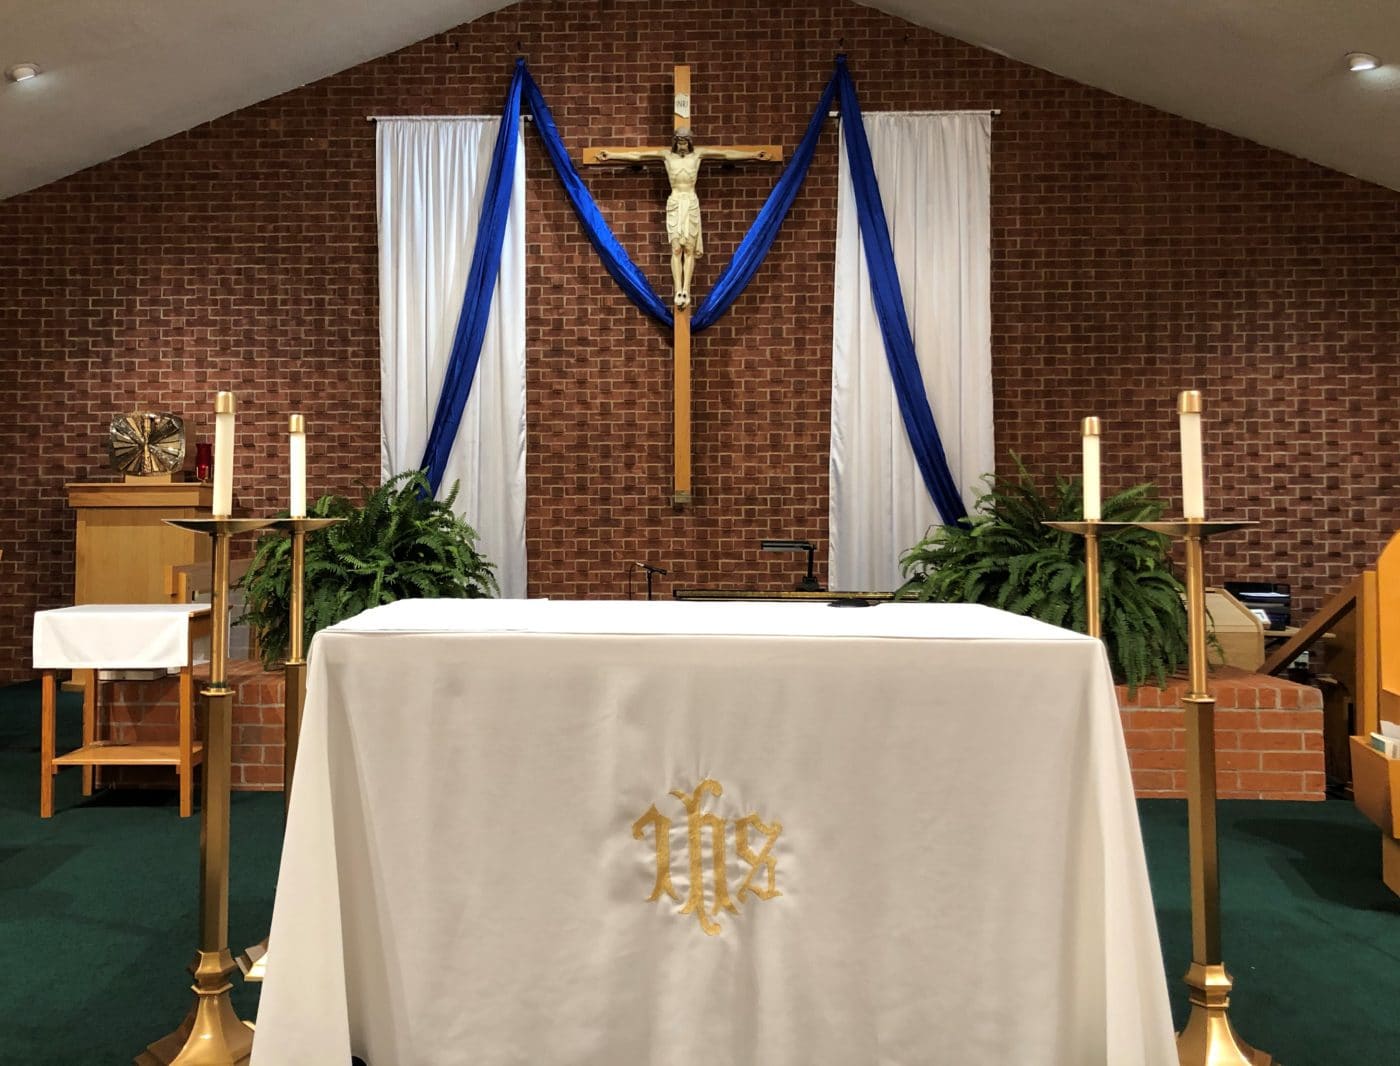 Sanctuary decorated for Marian feast.